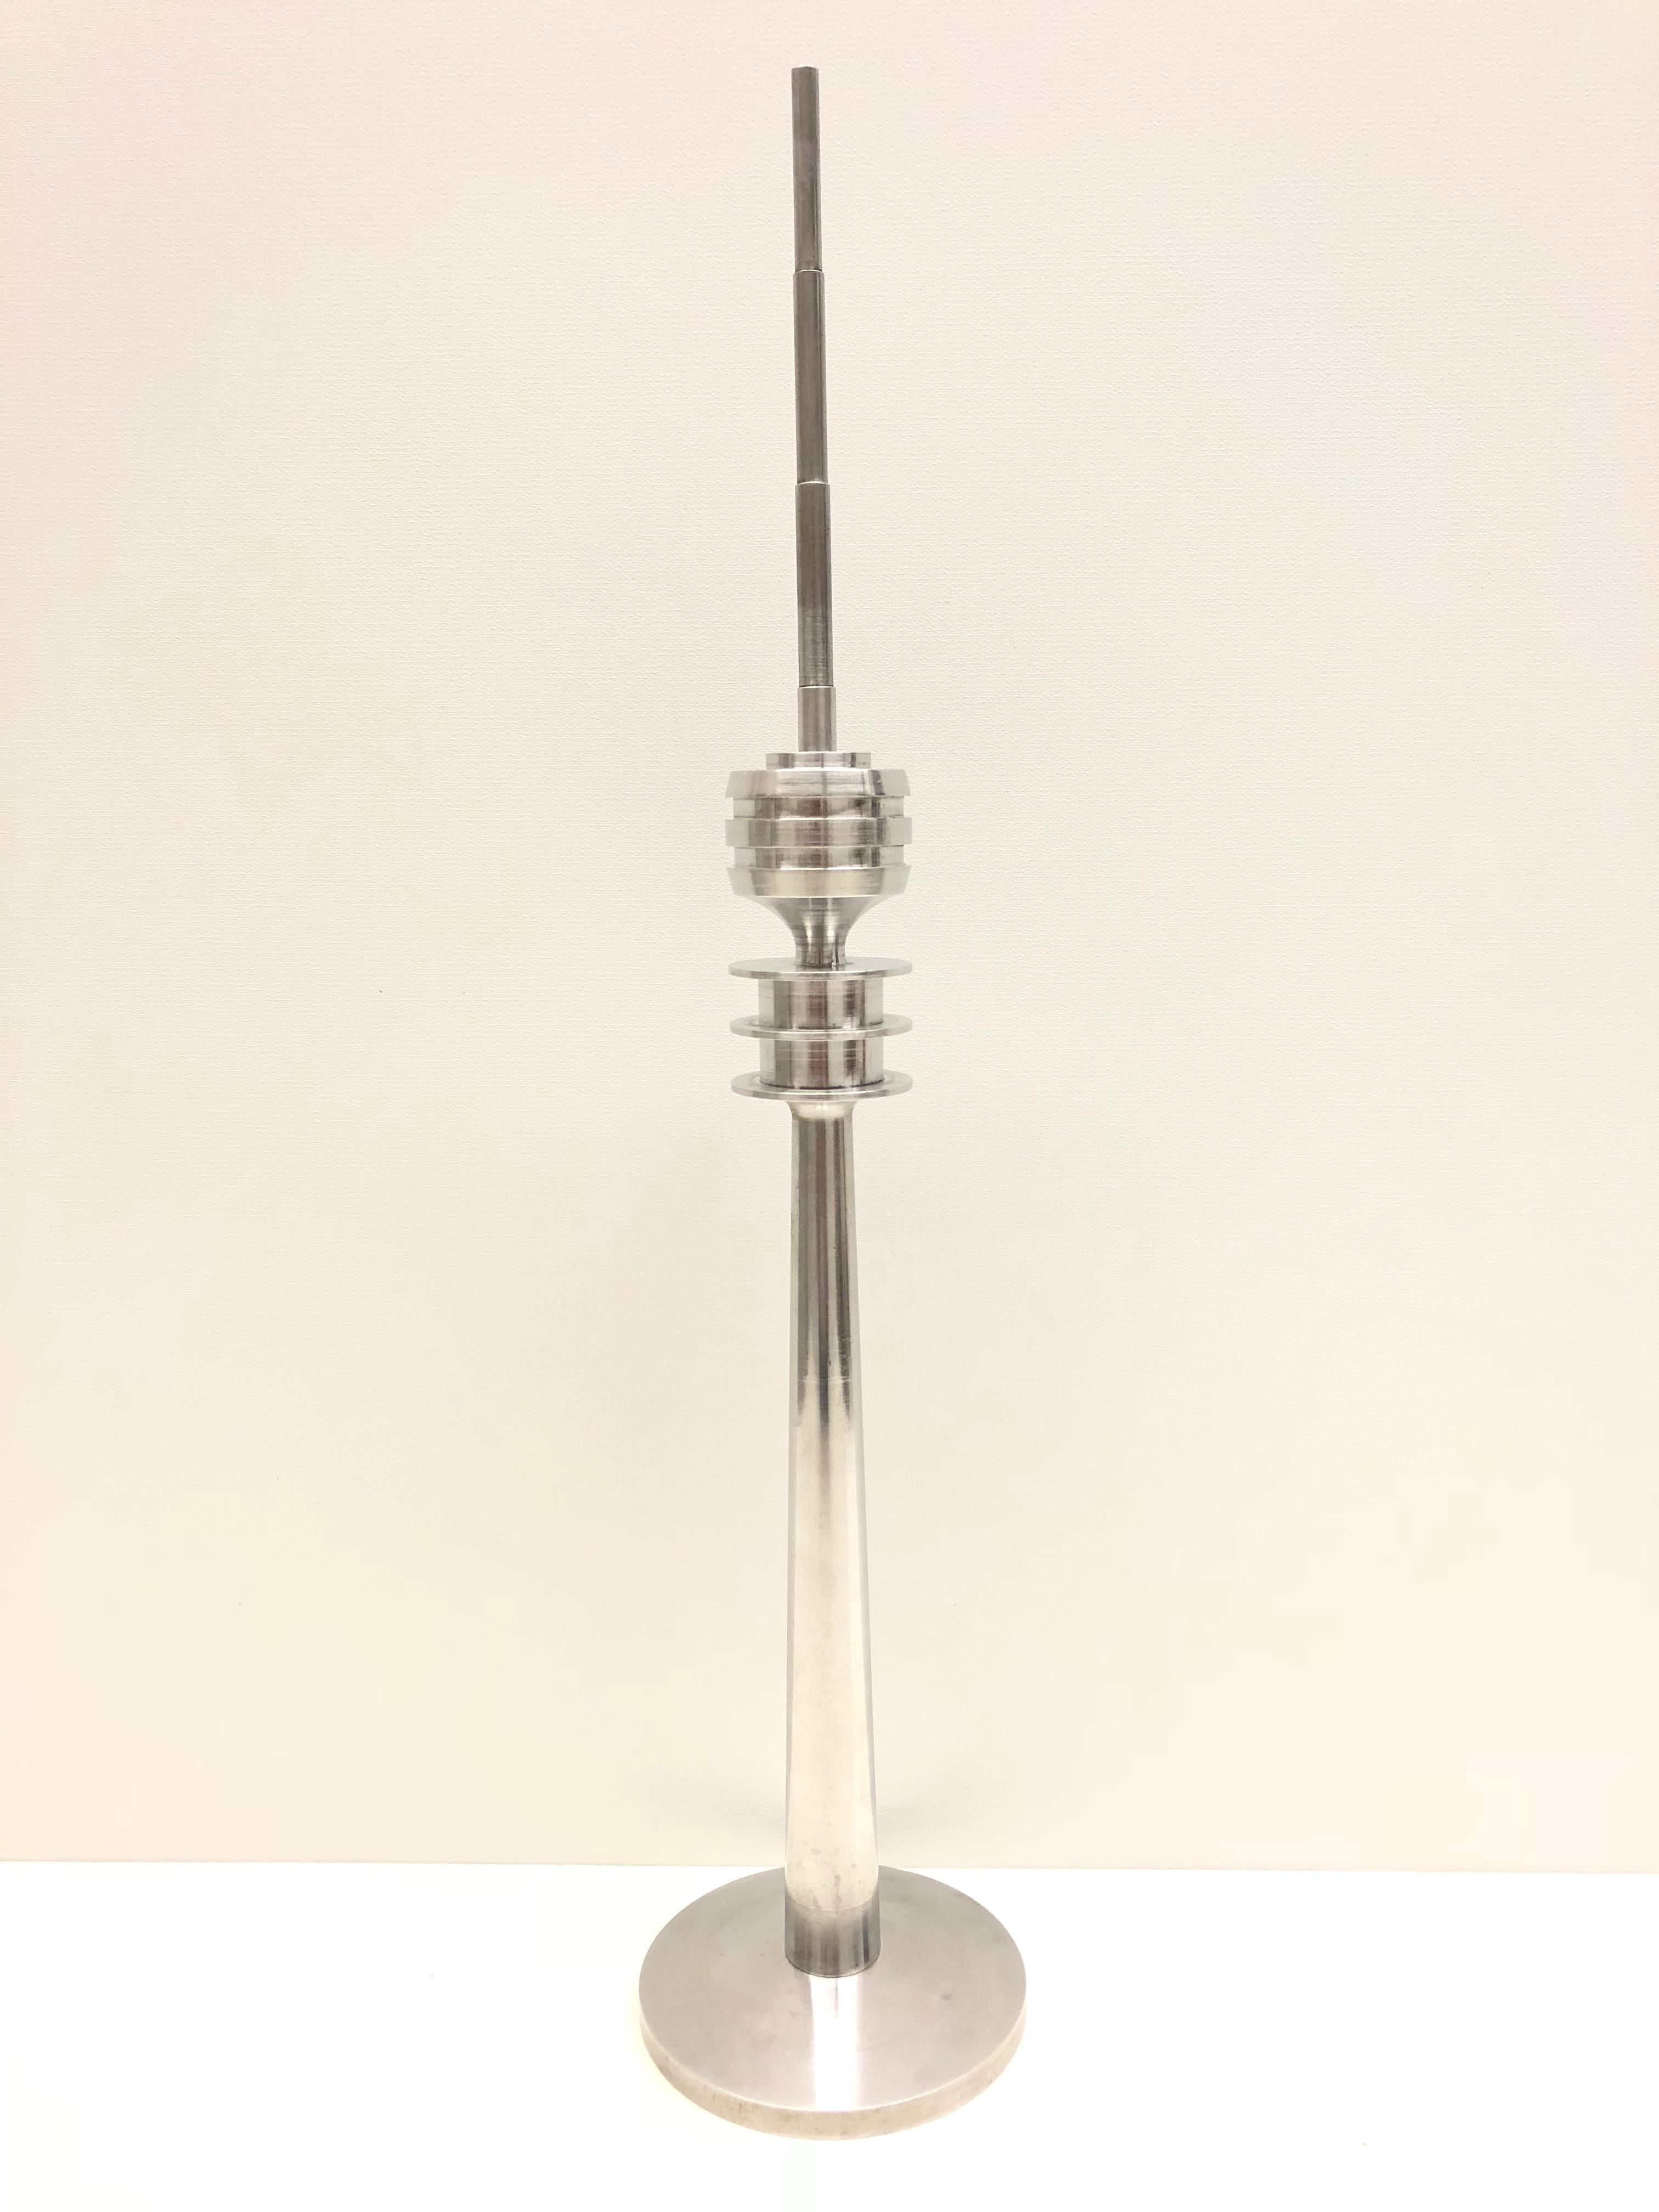 Hand-Crafted Munich TV Television Tower Scale Design Model 1970s